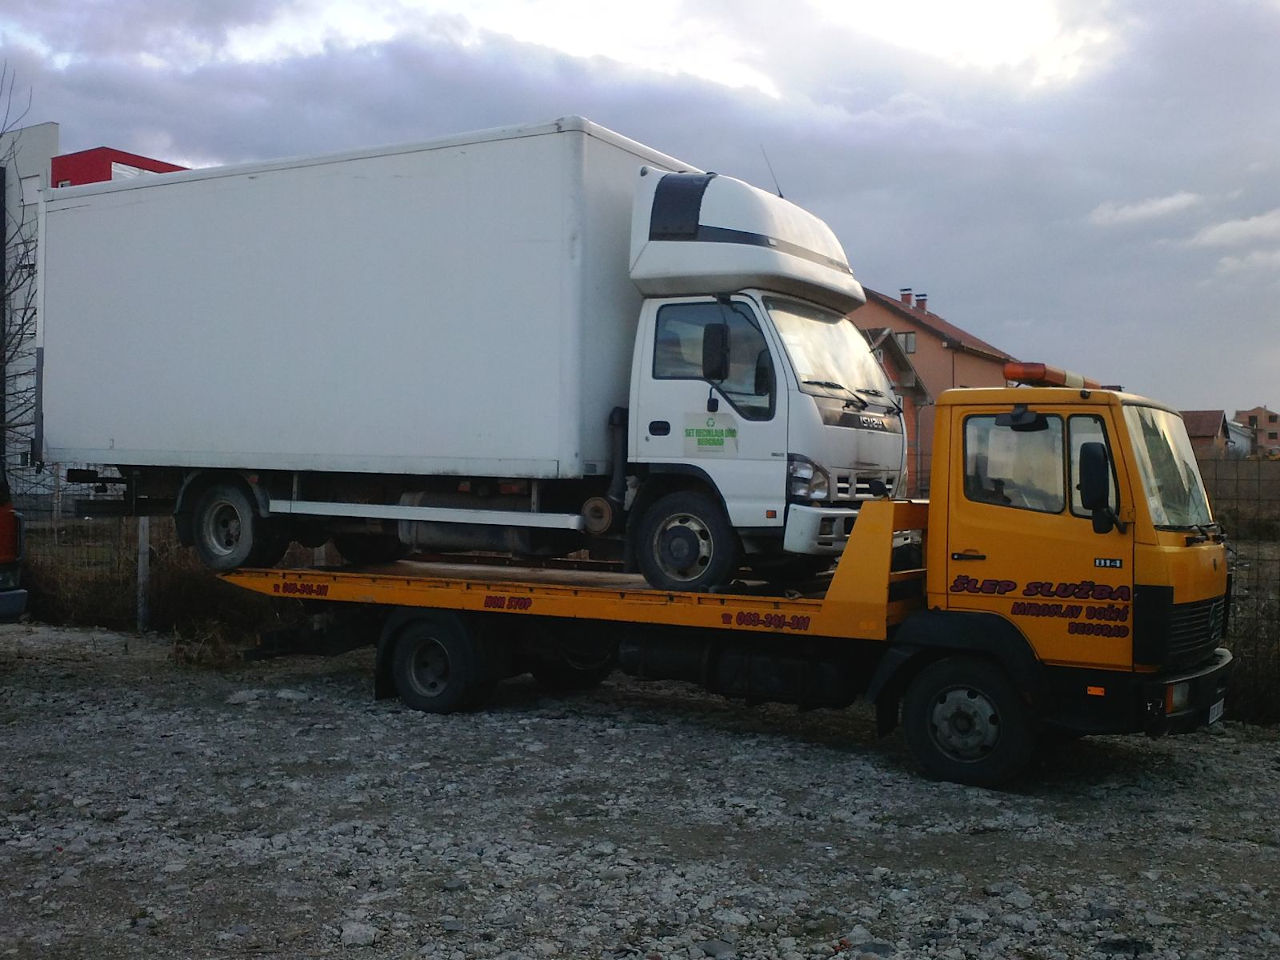 BOZIC TOWING SERVICE Towing service Beograd